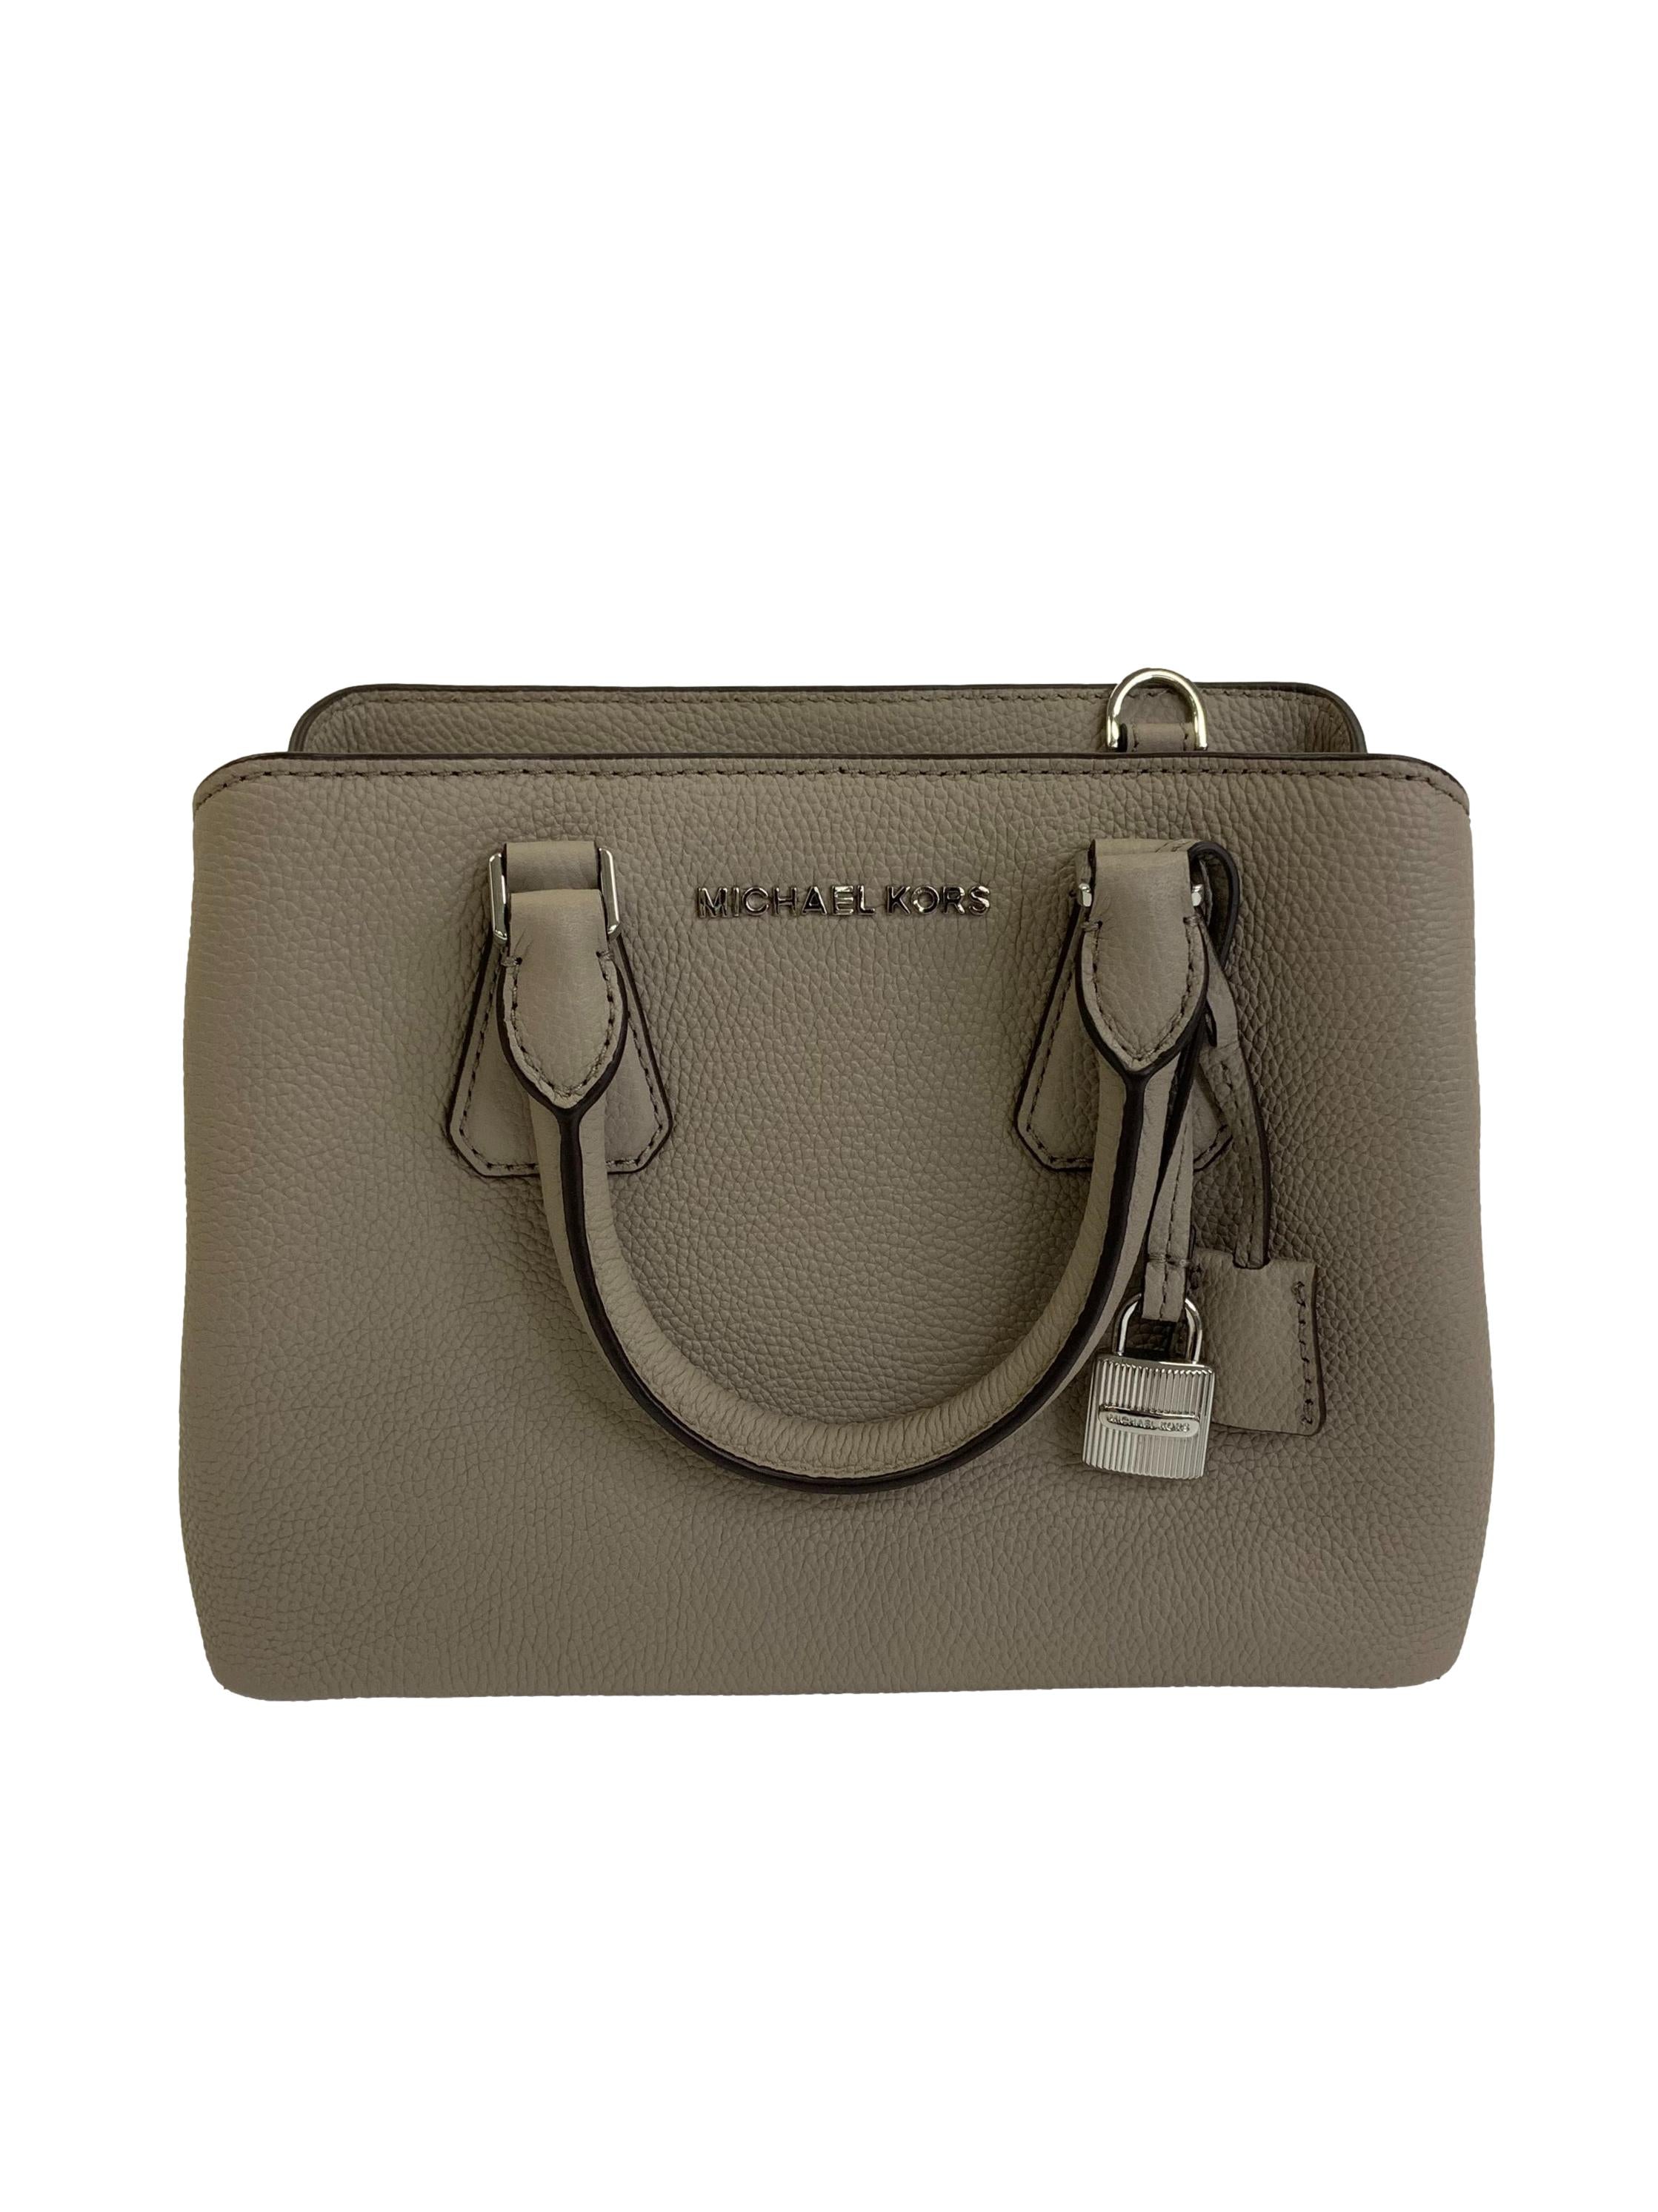 Camille Leather Satchel